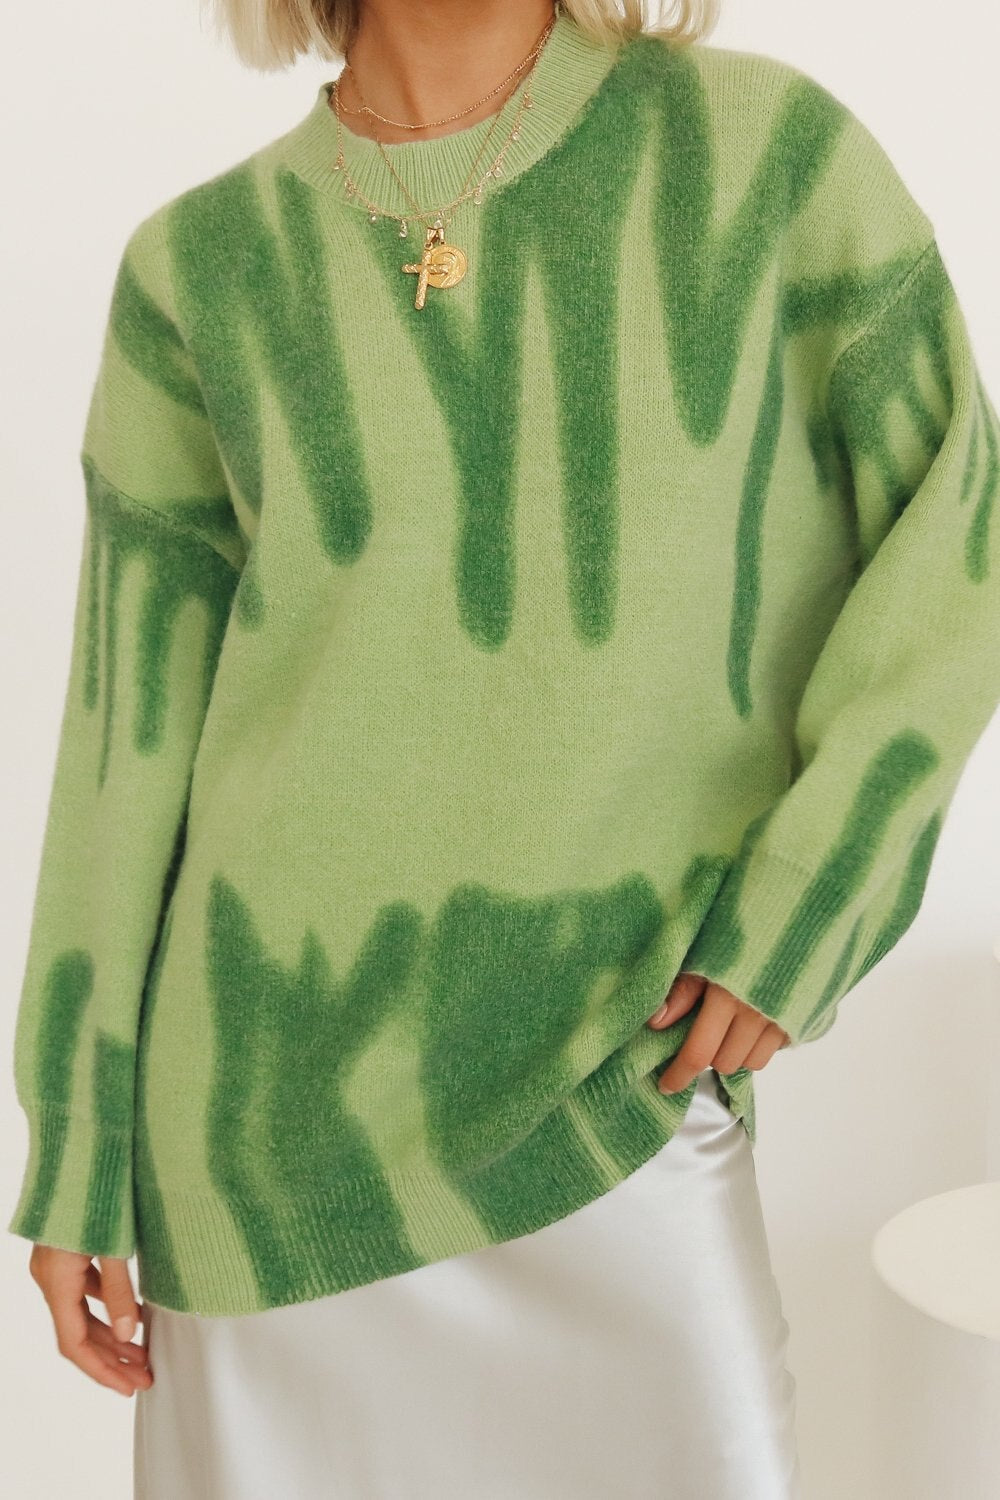 Geumxl Casual Green Pullovers Sweater Women Top 2023 Vintage Winter O-Neck Loose Long Sweaters Warm Lazy Oversized Outerwear